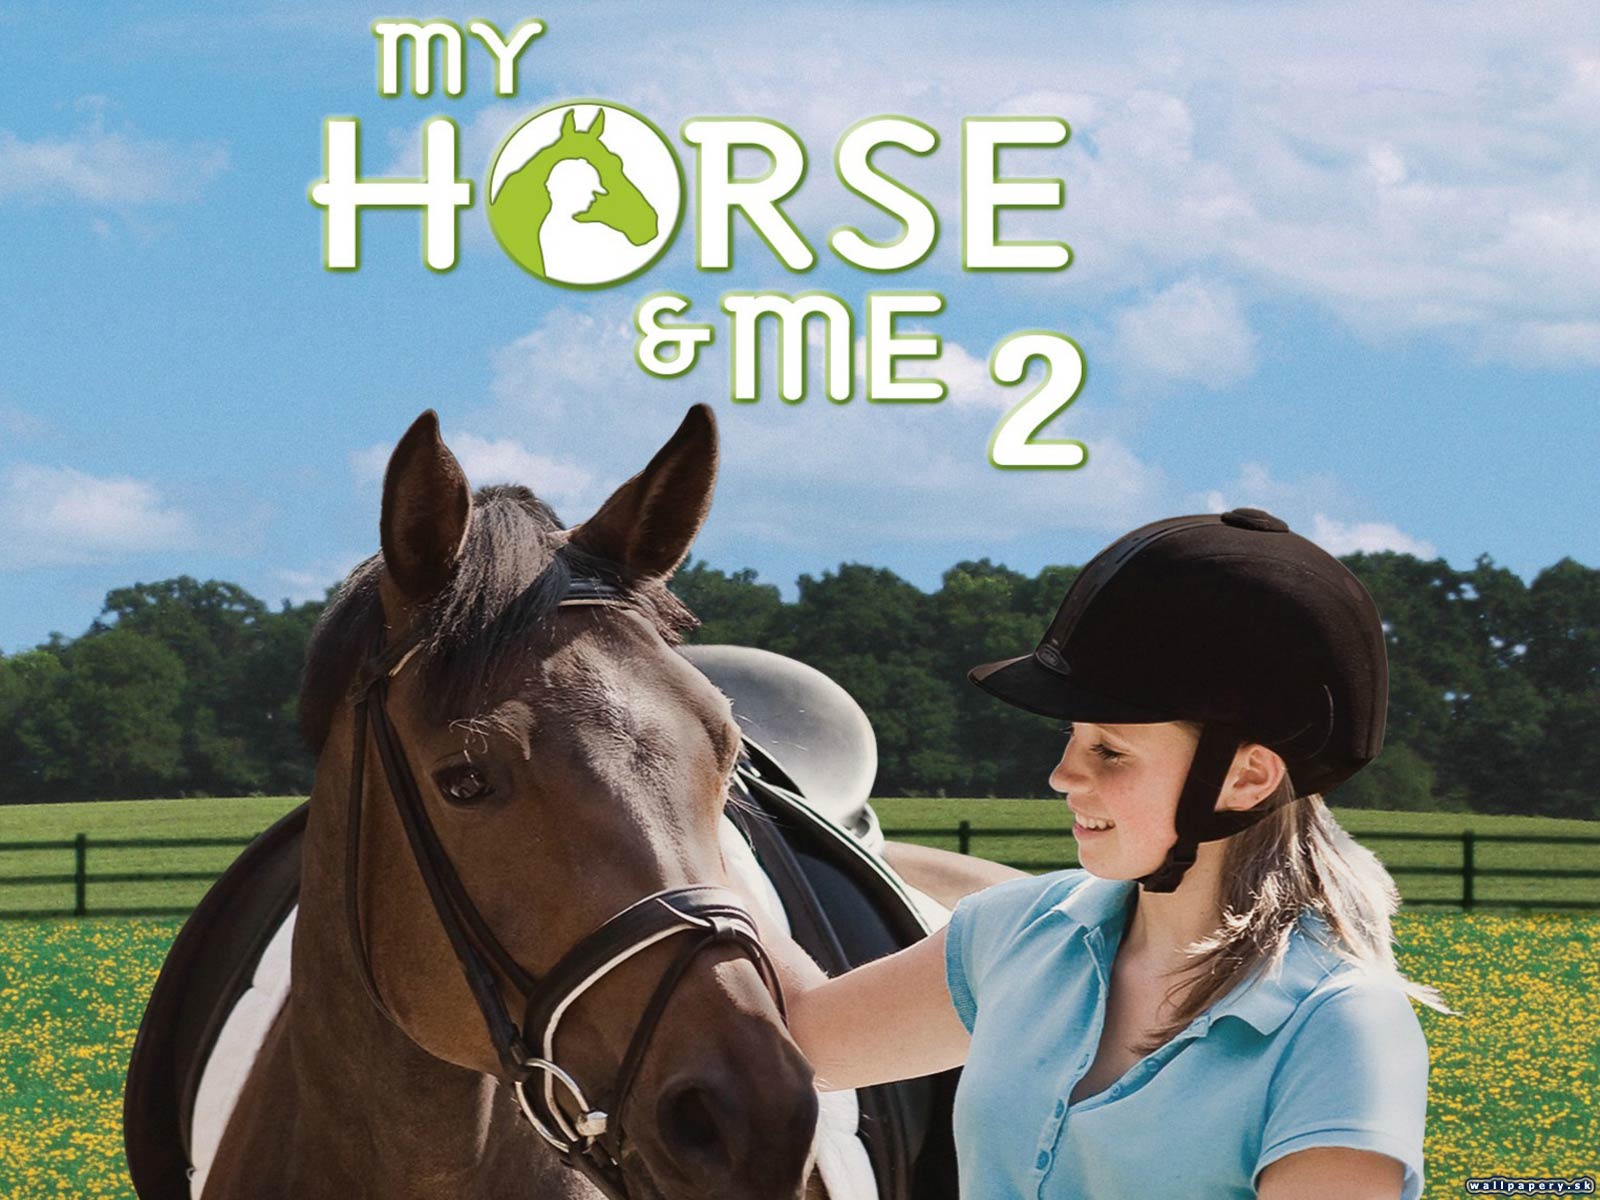 My Horse and Me 2 - wallpaper 1